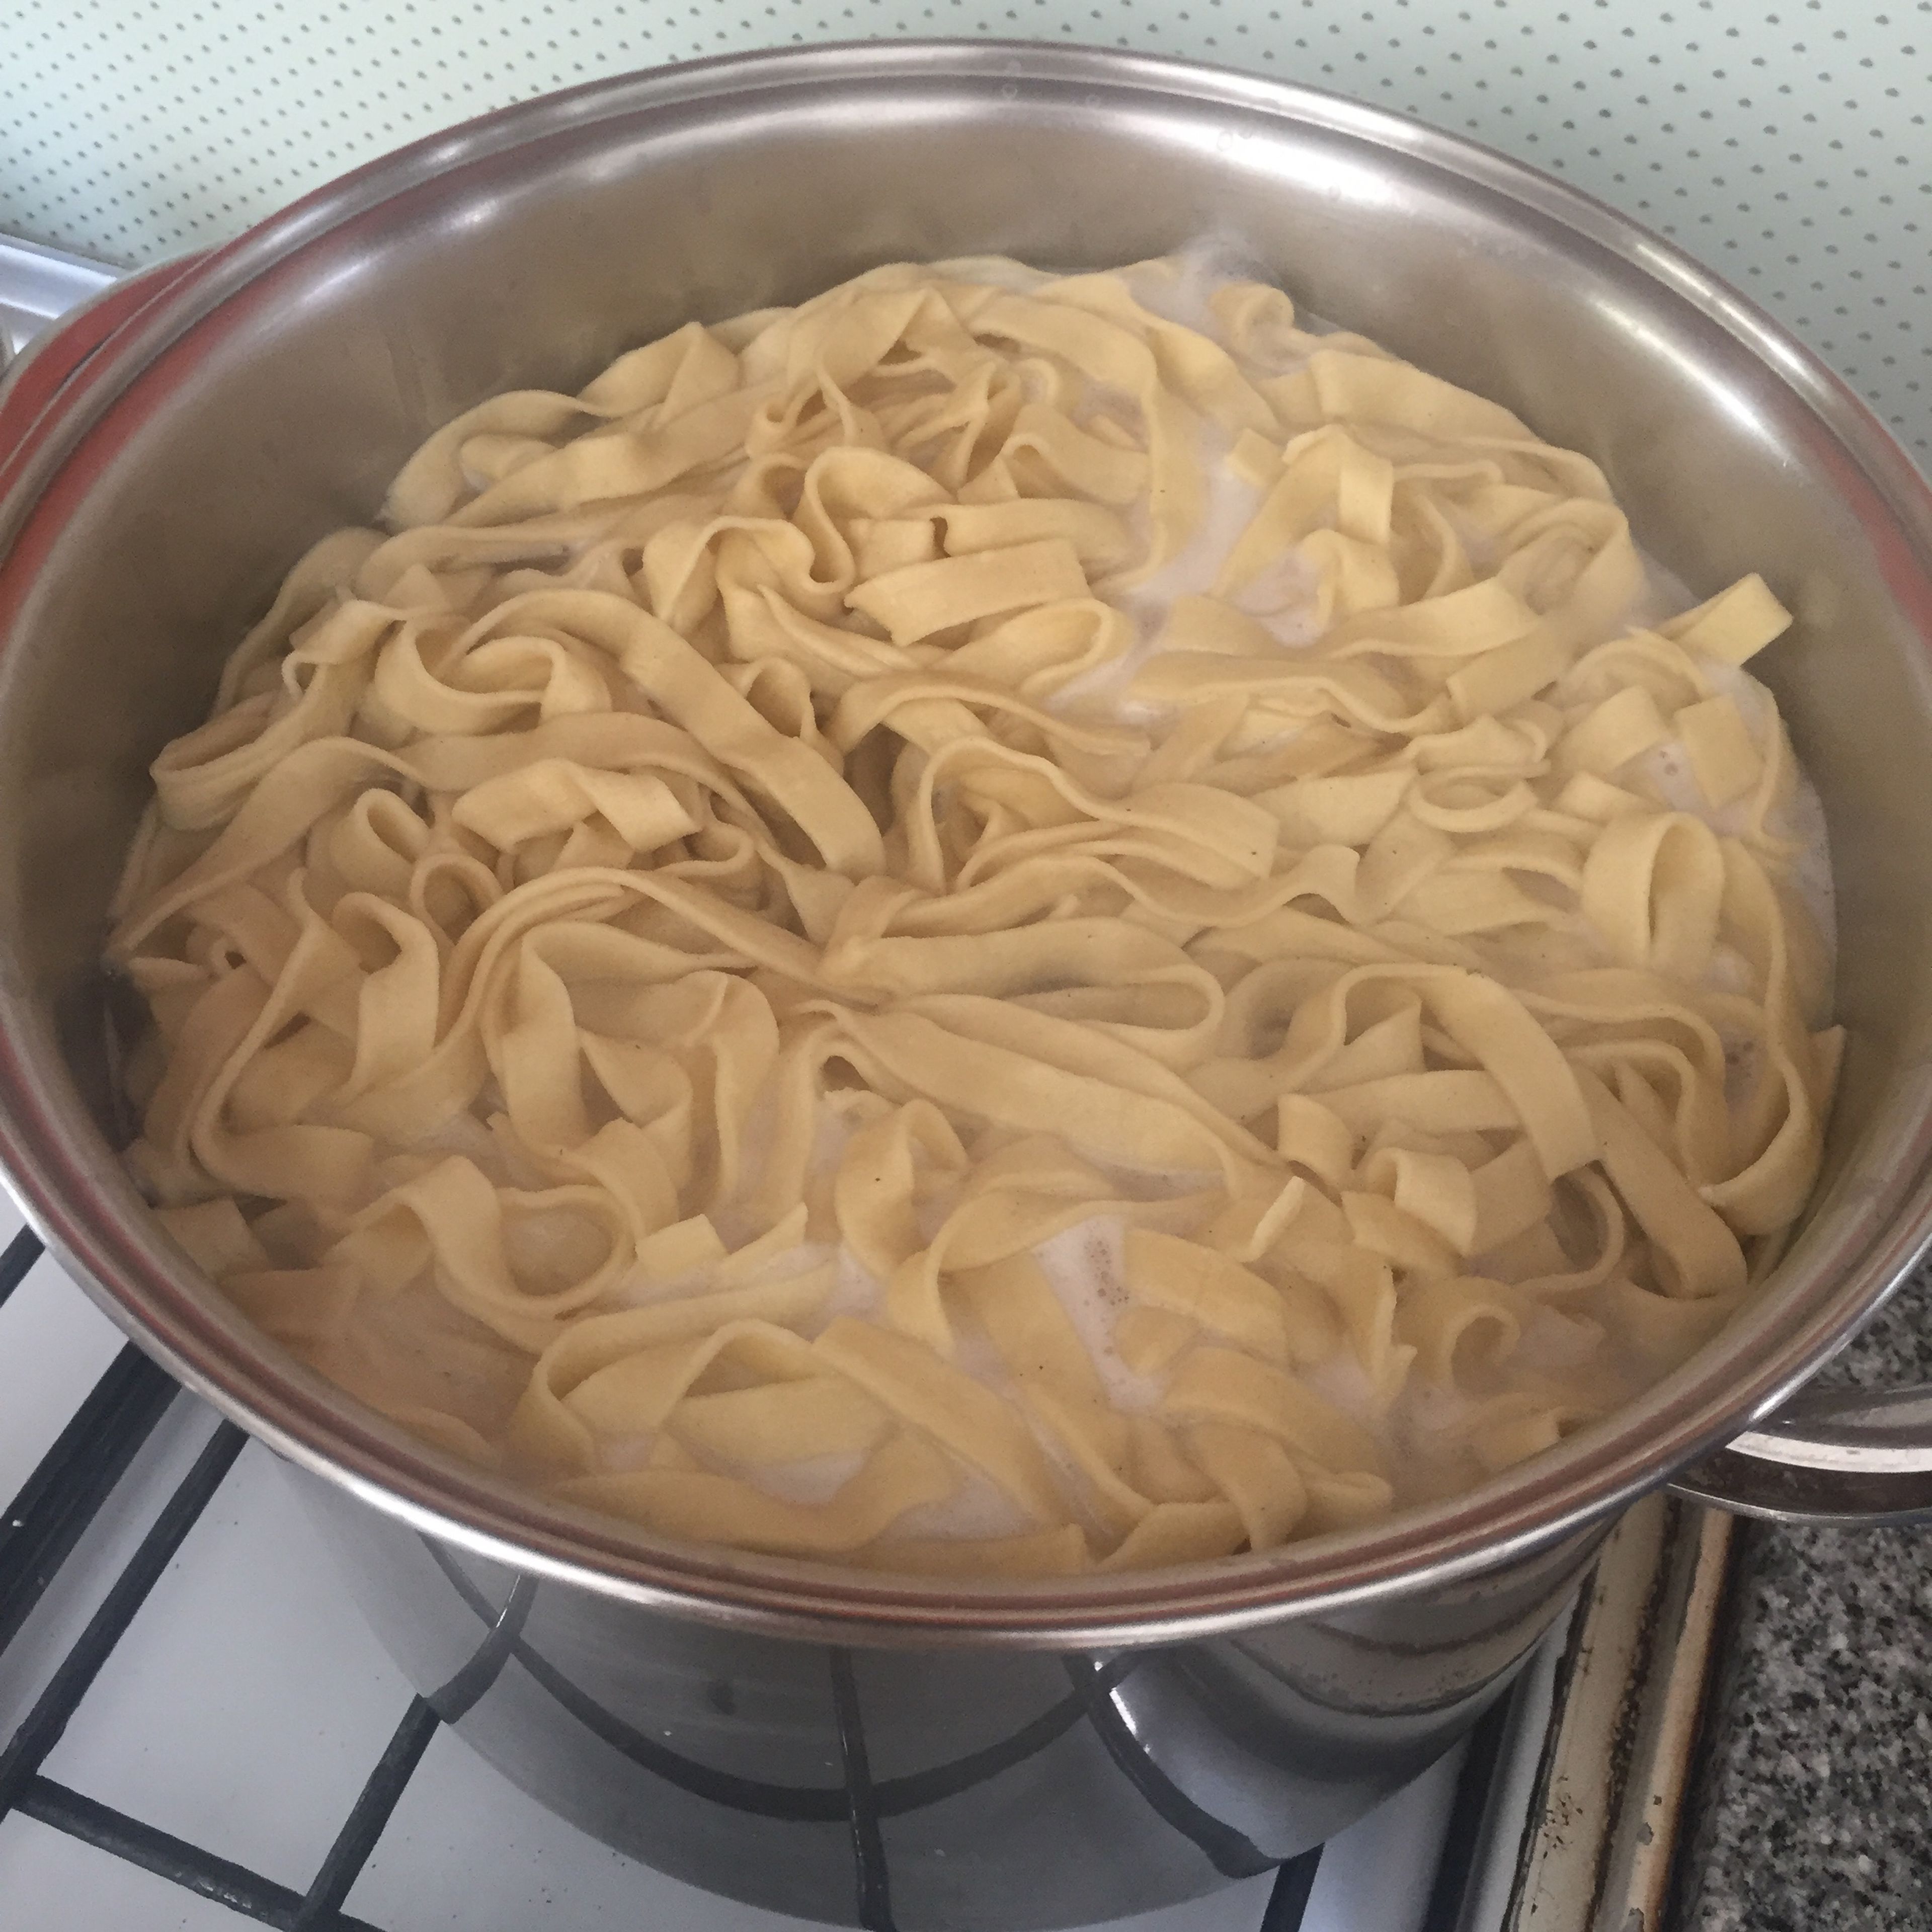 set water to boil, and season it with salt. Once it is boiling, add the pasta, and cook for 4-5 minutes. (fresh pasta cooks quicker since it doesn’t need to hydrate as well as cook)